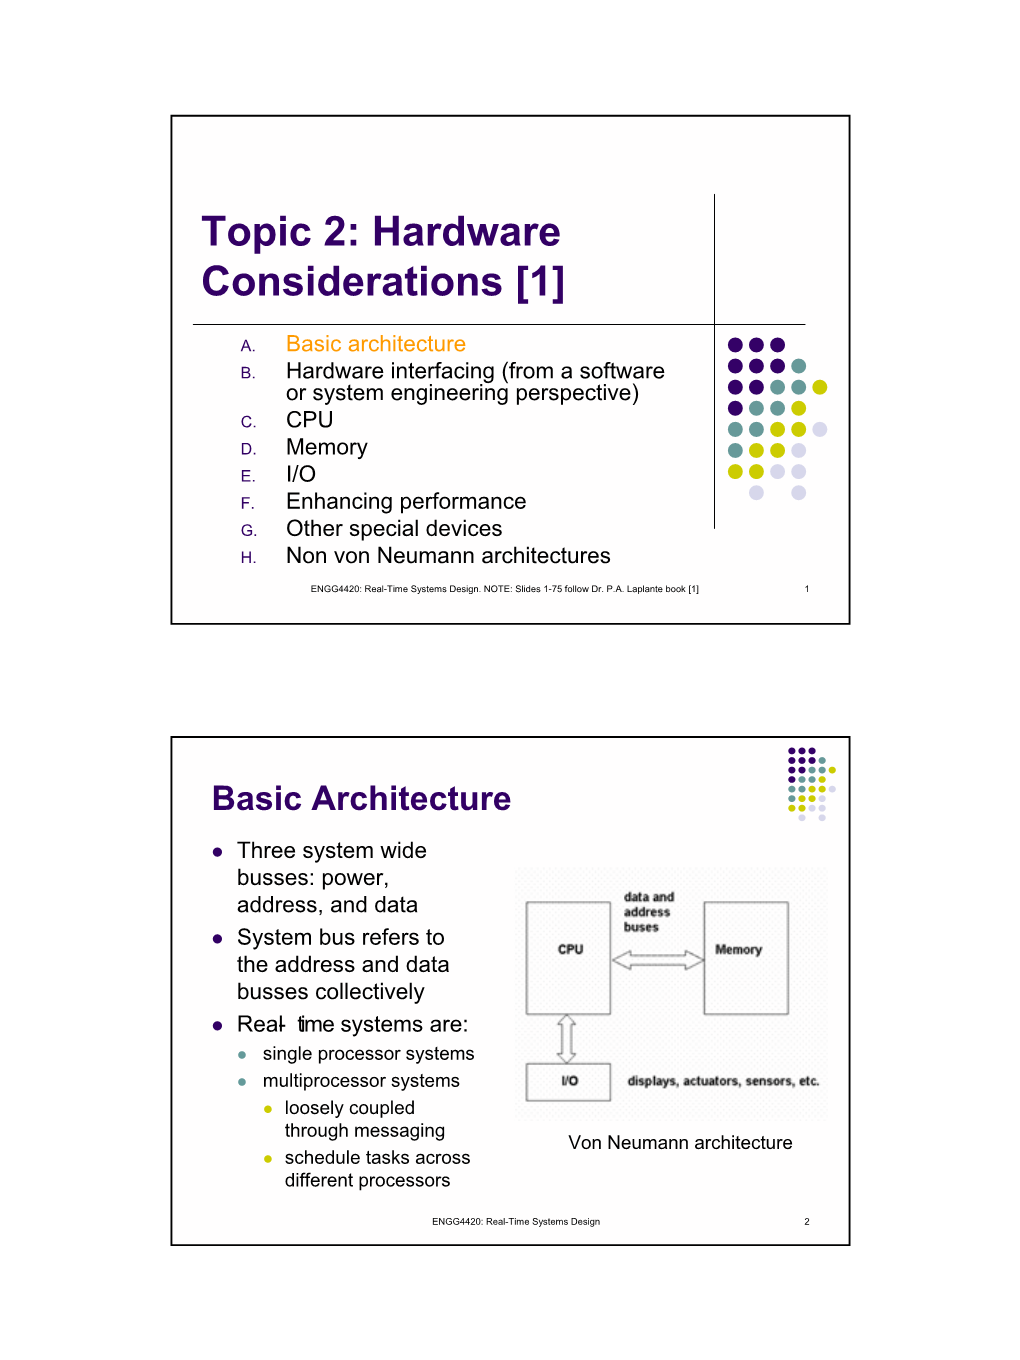 Topic 2: Hardware Considerations [1]